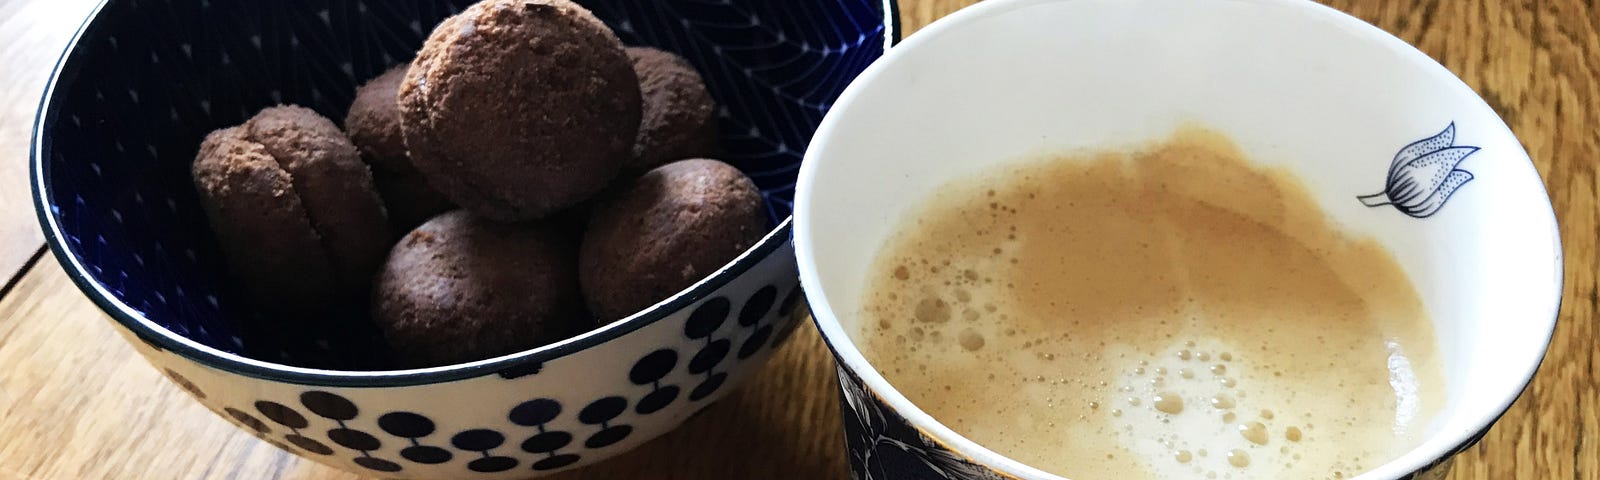 A cup of coffee and some Italian biscuits